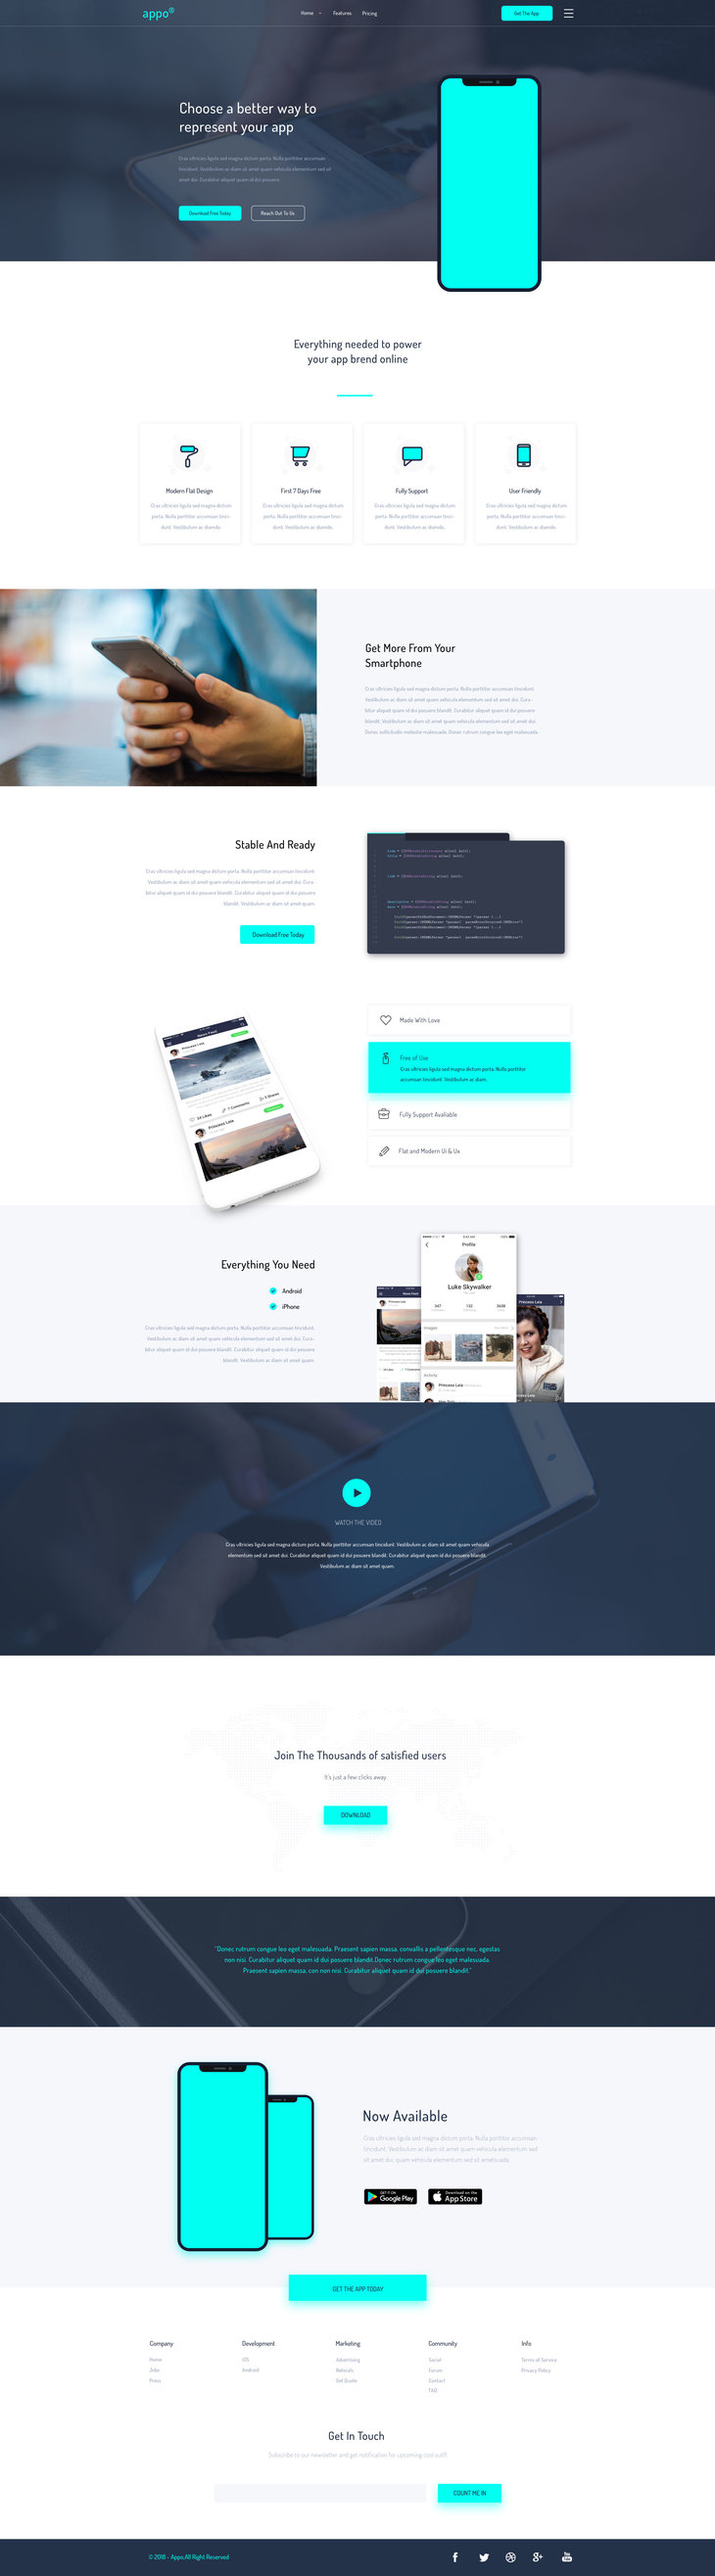 Appo - Landing Page Template